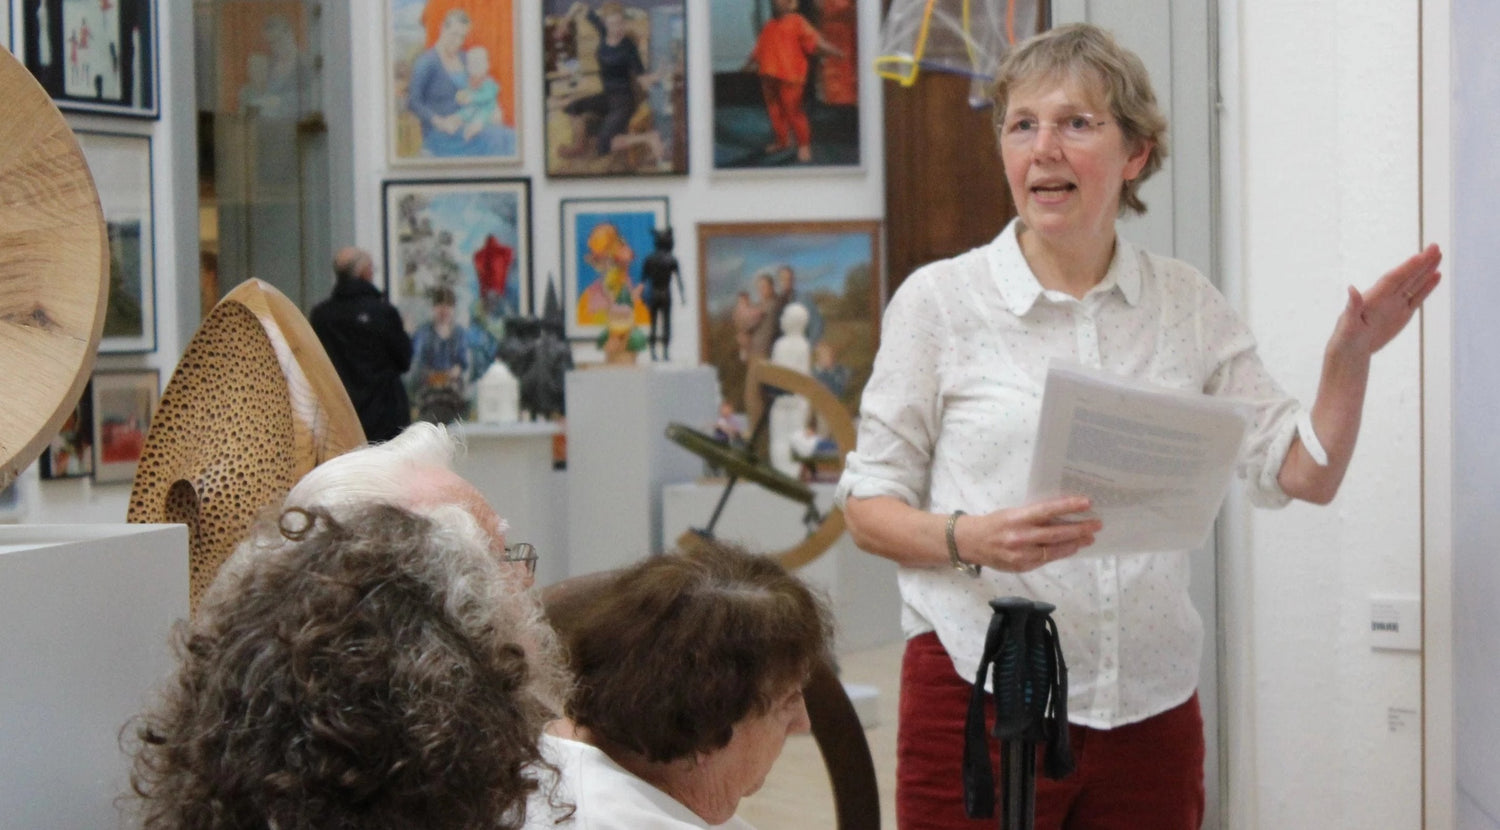 Described Gallery Tour for Visually Impaired Adults